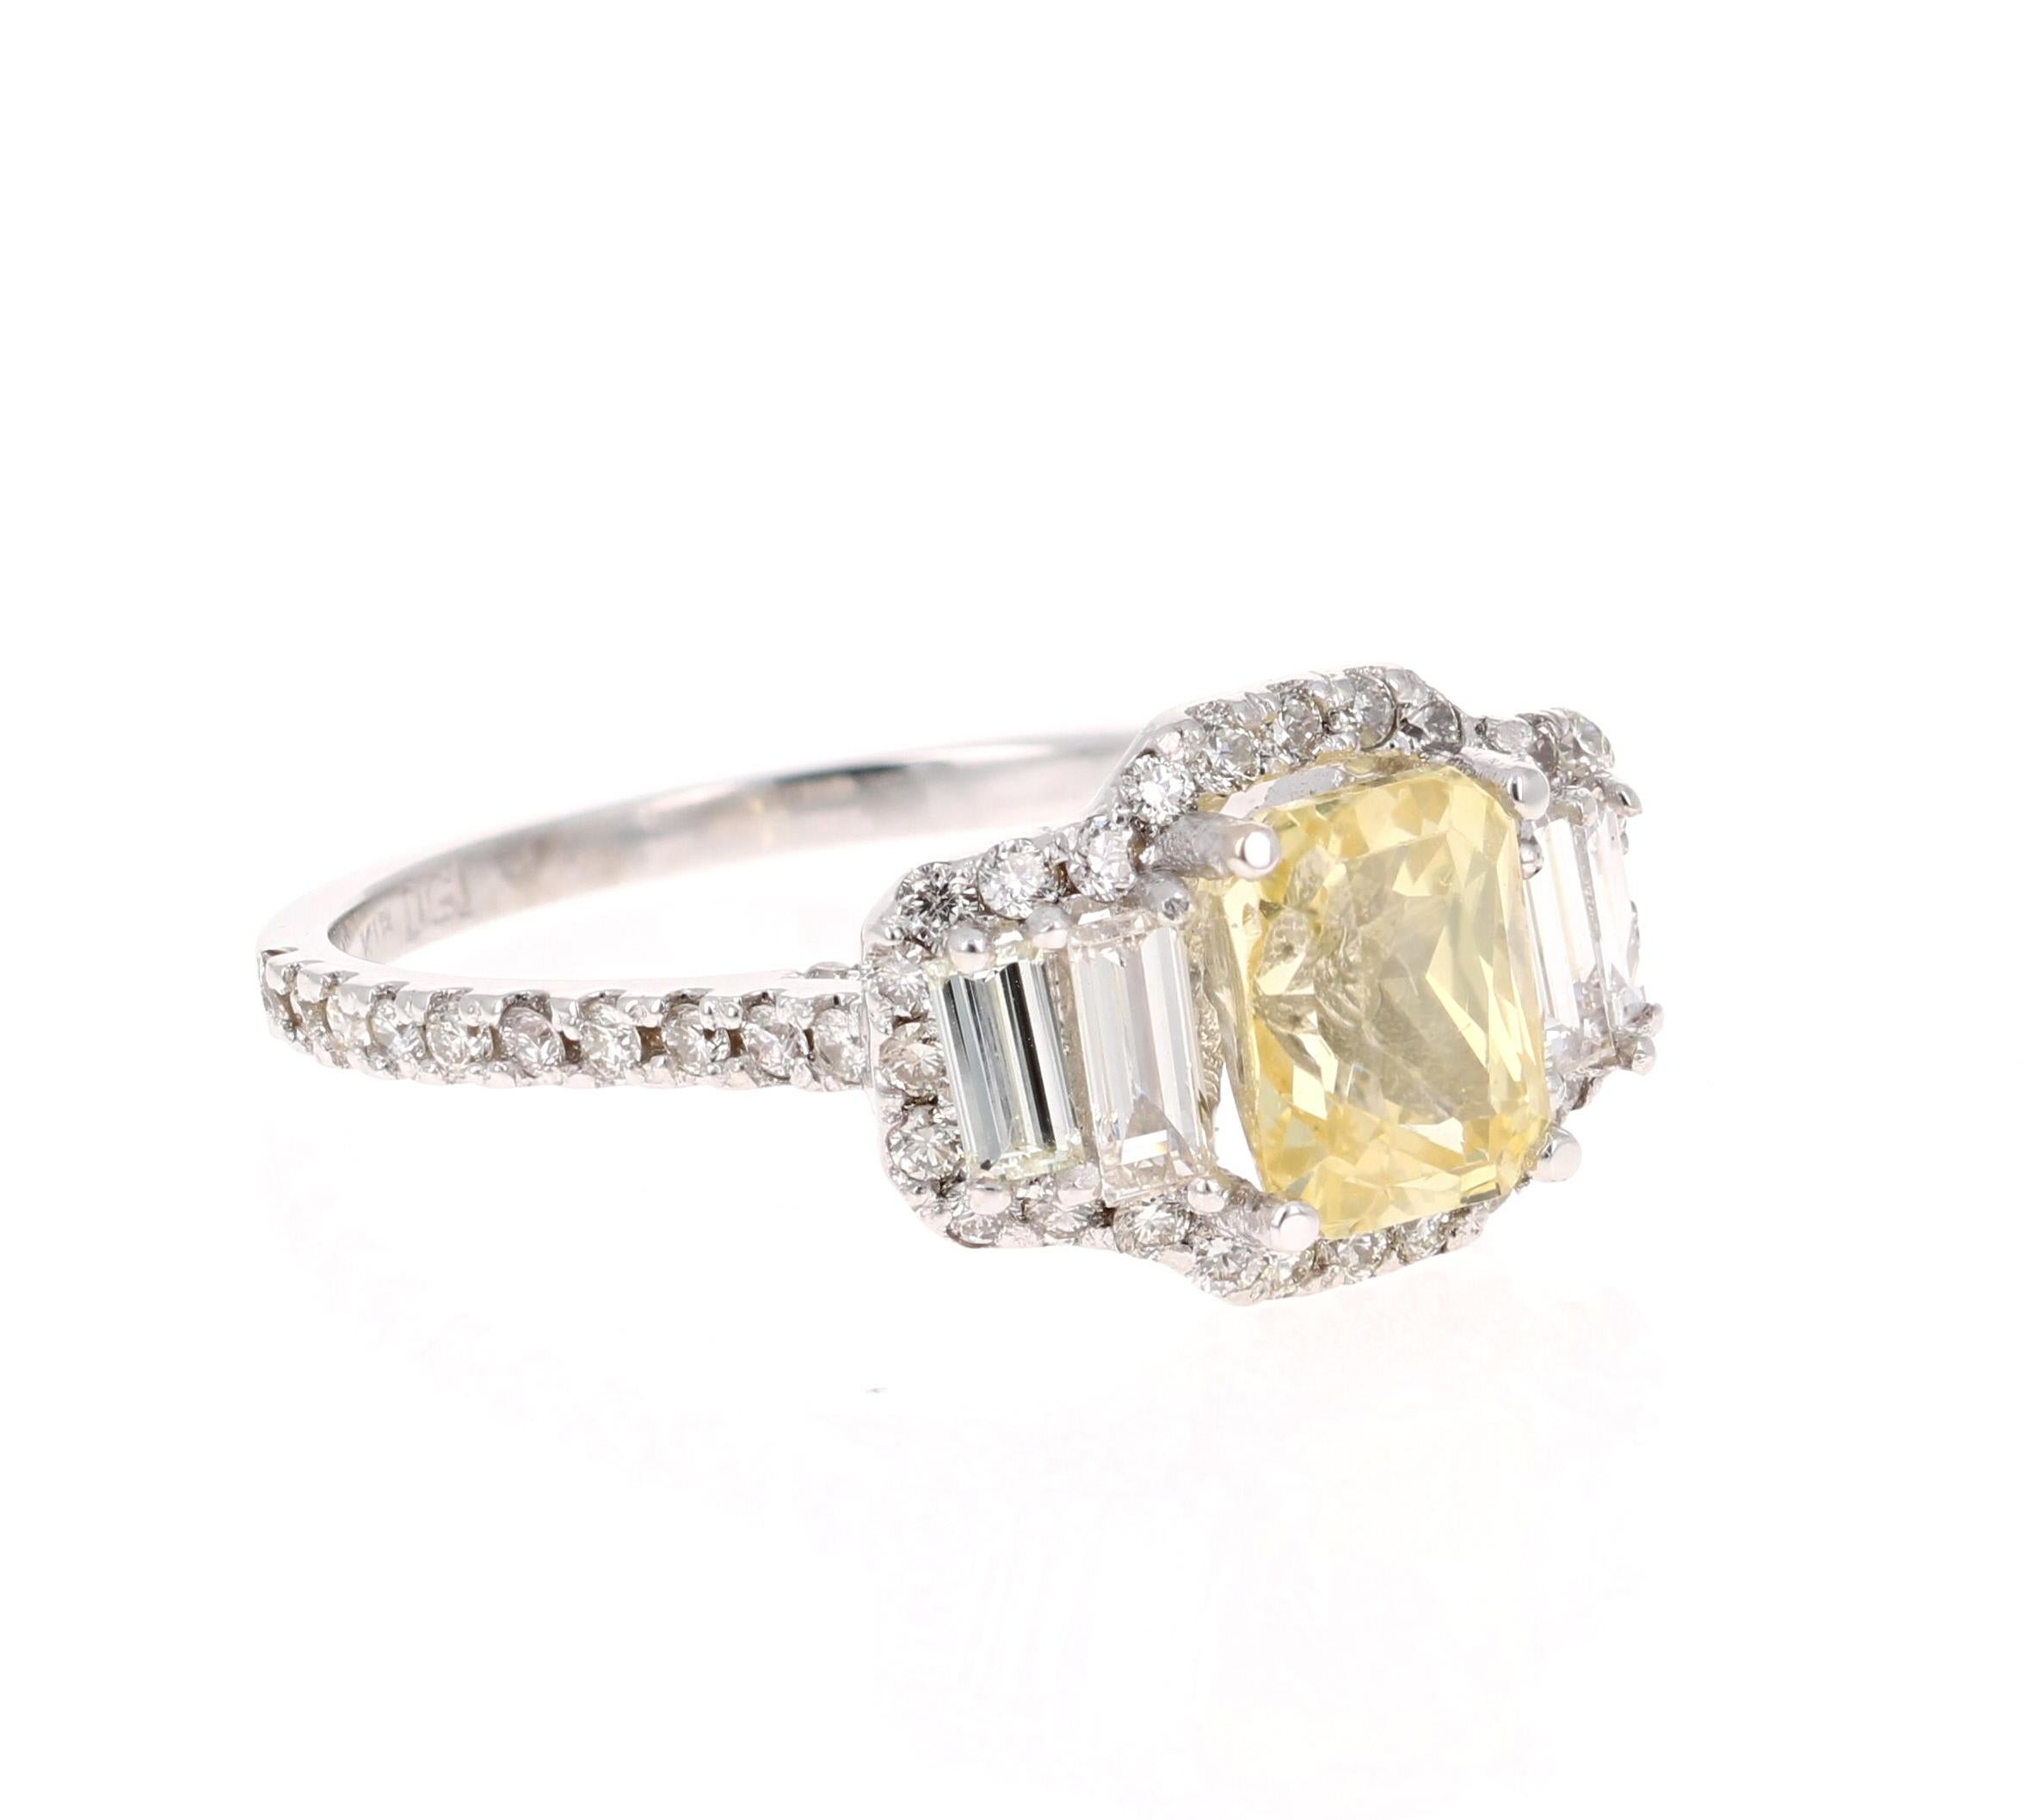 A gorgeous Yellow Sapphire Ring in a classic halo setting and resembling a three-stone ring! This gorgeous Emerald Cut Yellow Sapphire is a natural, no heat Sapphire that weighs 2.08 Carats.  
It has 86 Round Cut Diamonds that weigh 0.65 carats